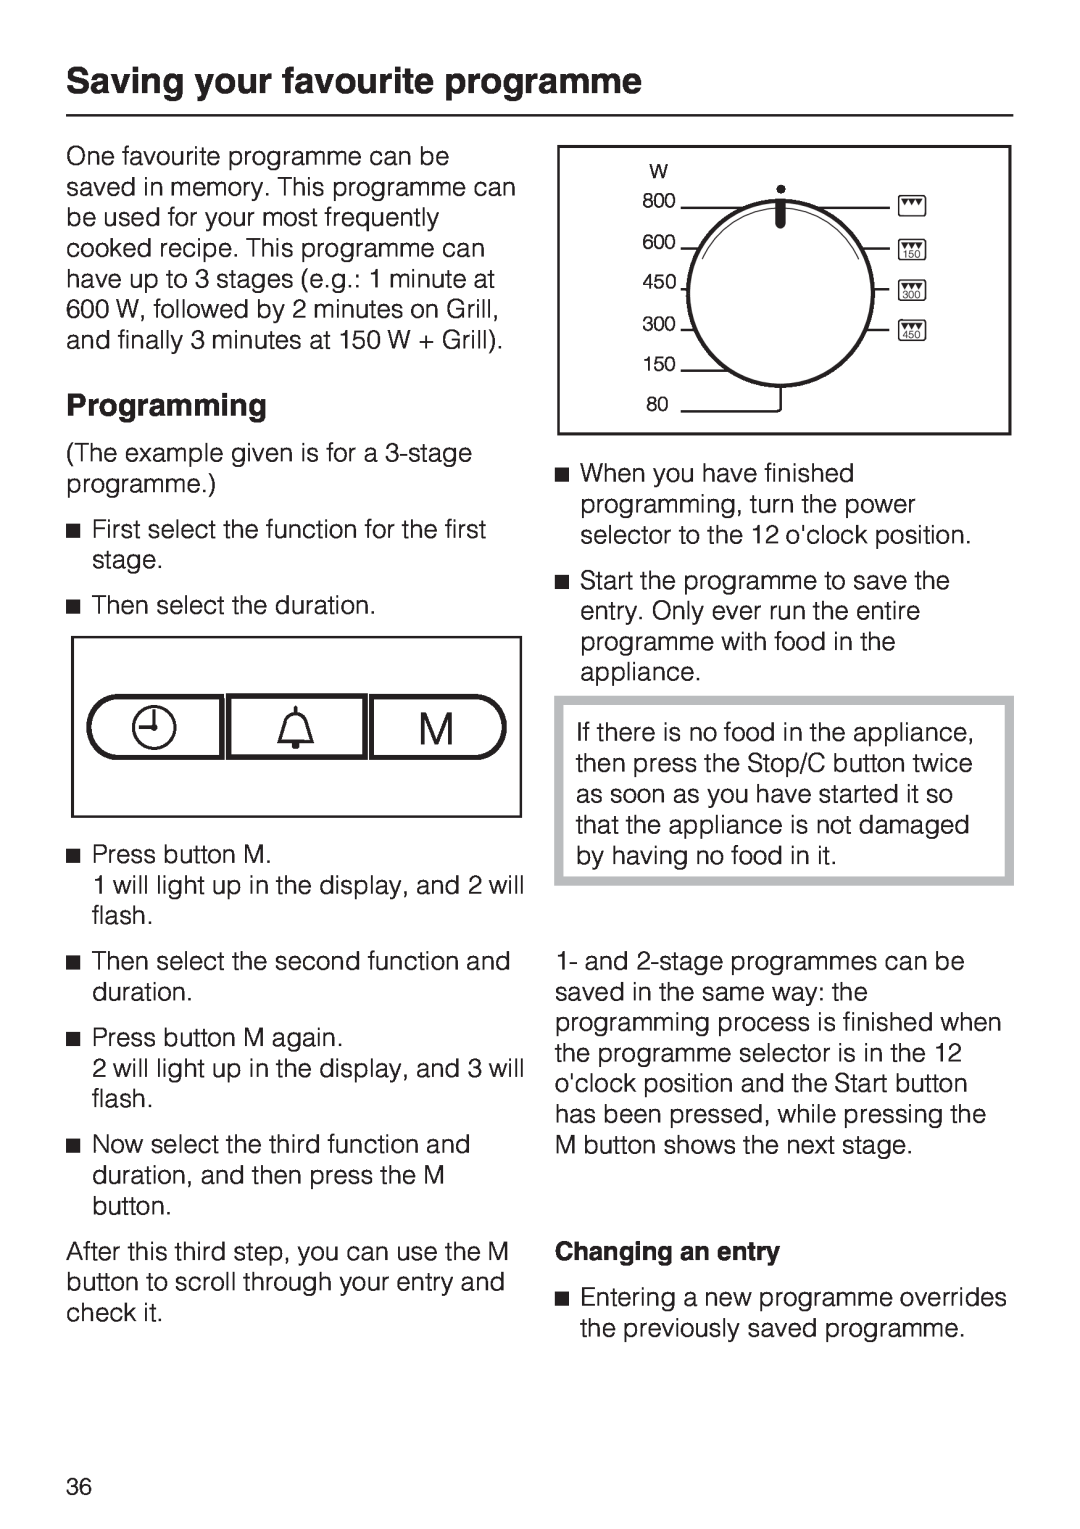 Miele M 8151-1, M 8161-1 manual Saving your favourite programme, Programming, Then select the duration, Changing an entry 